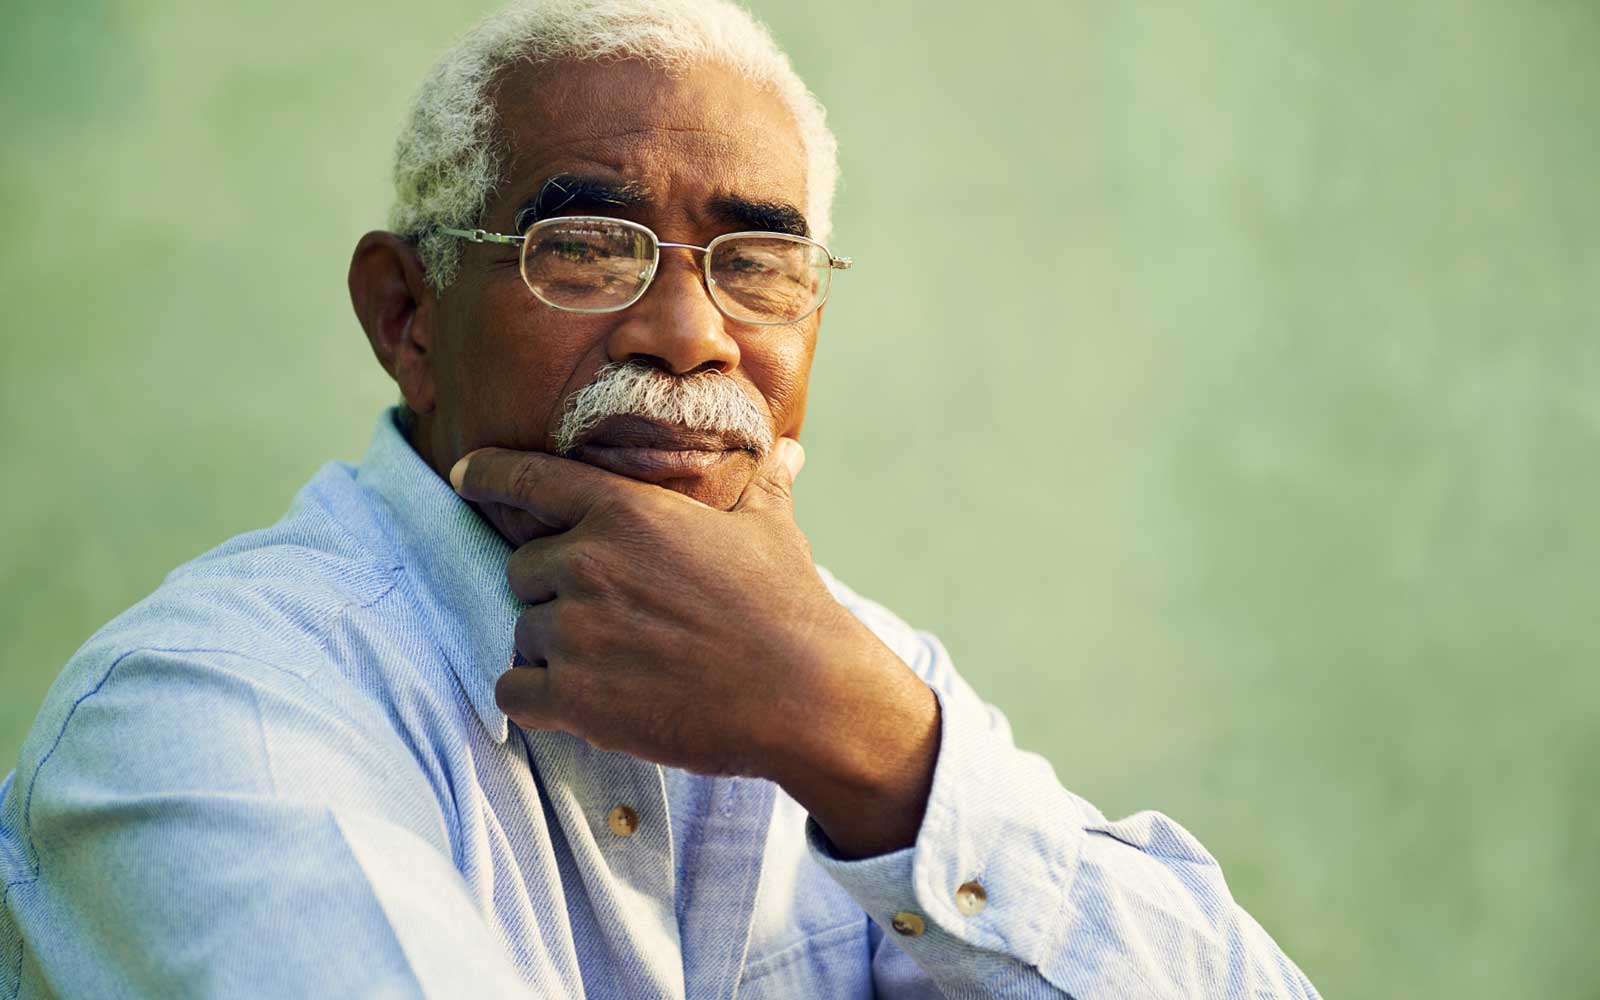 Senior African American man smiling and looking contemplative for a blog about dementia.